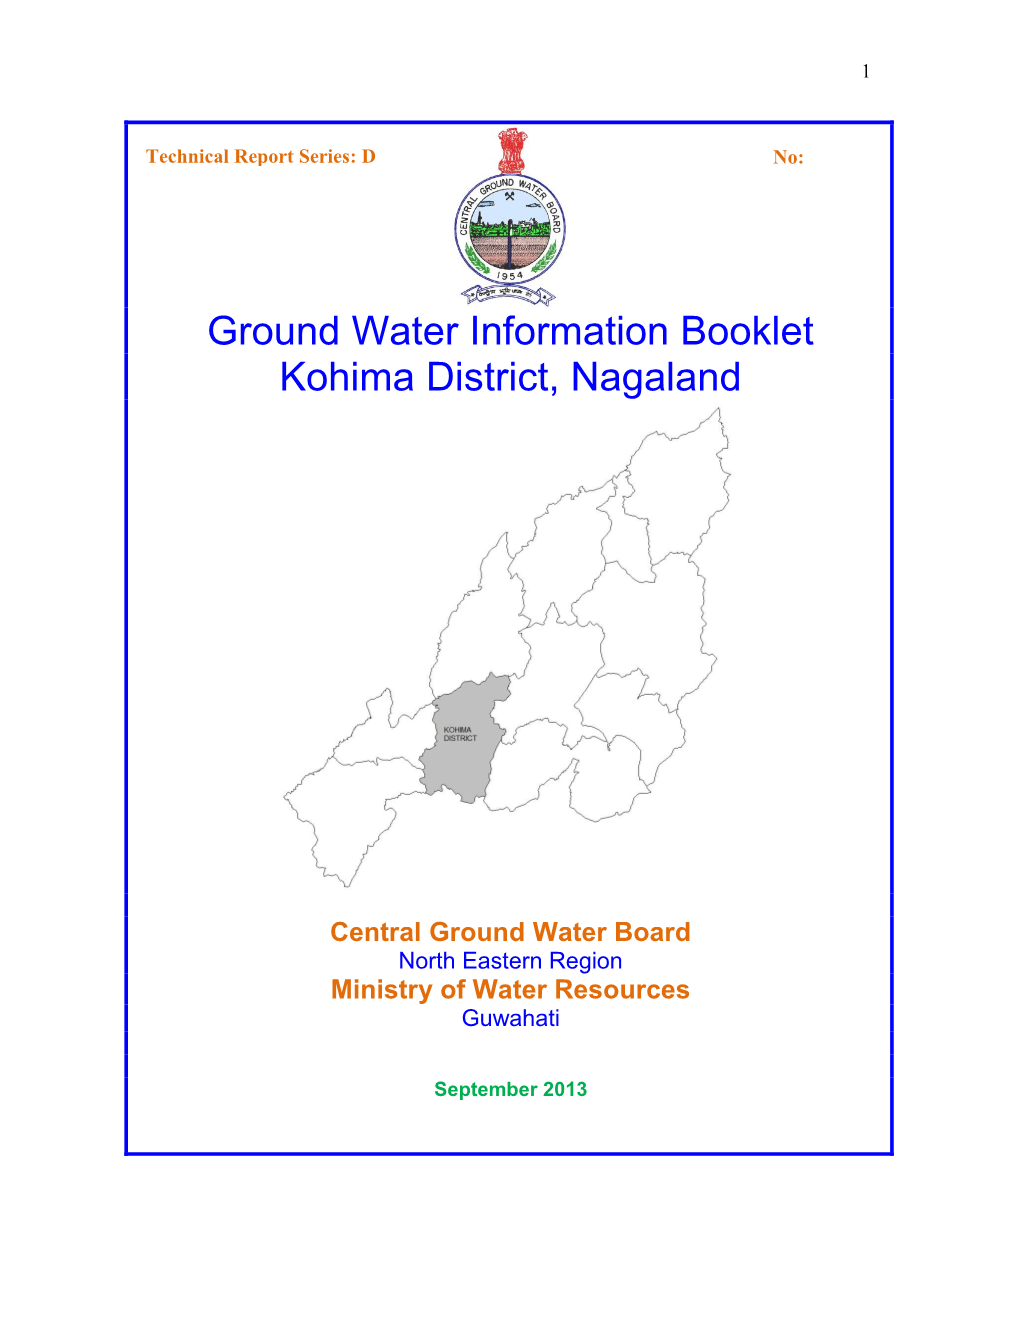 Ground Water Information Booklet Kohima District, Nagaland